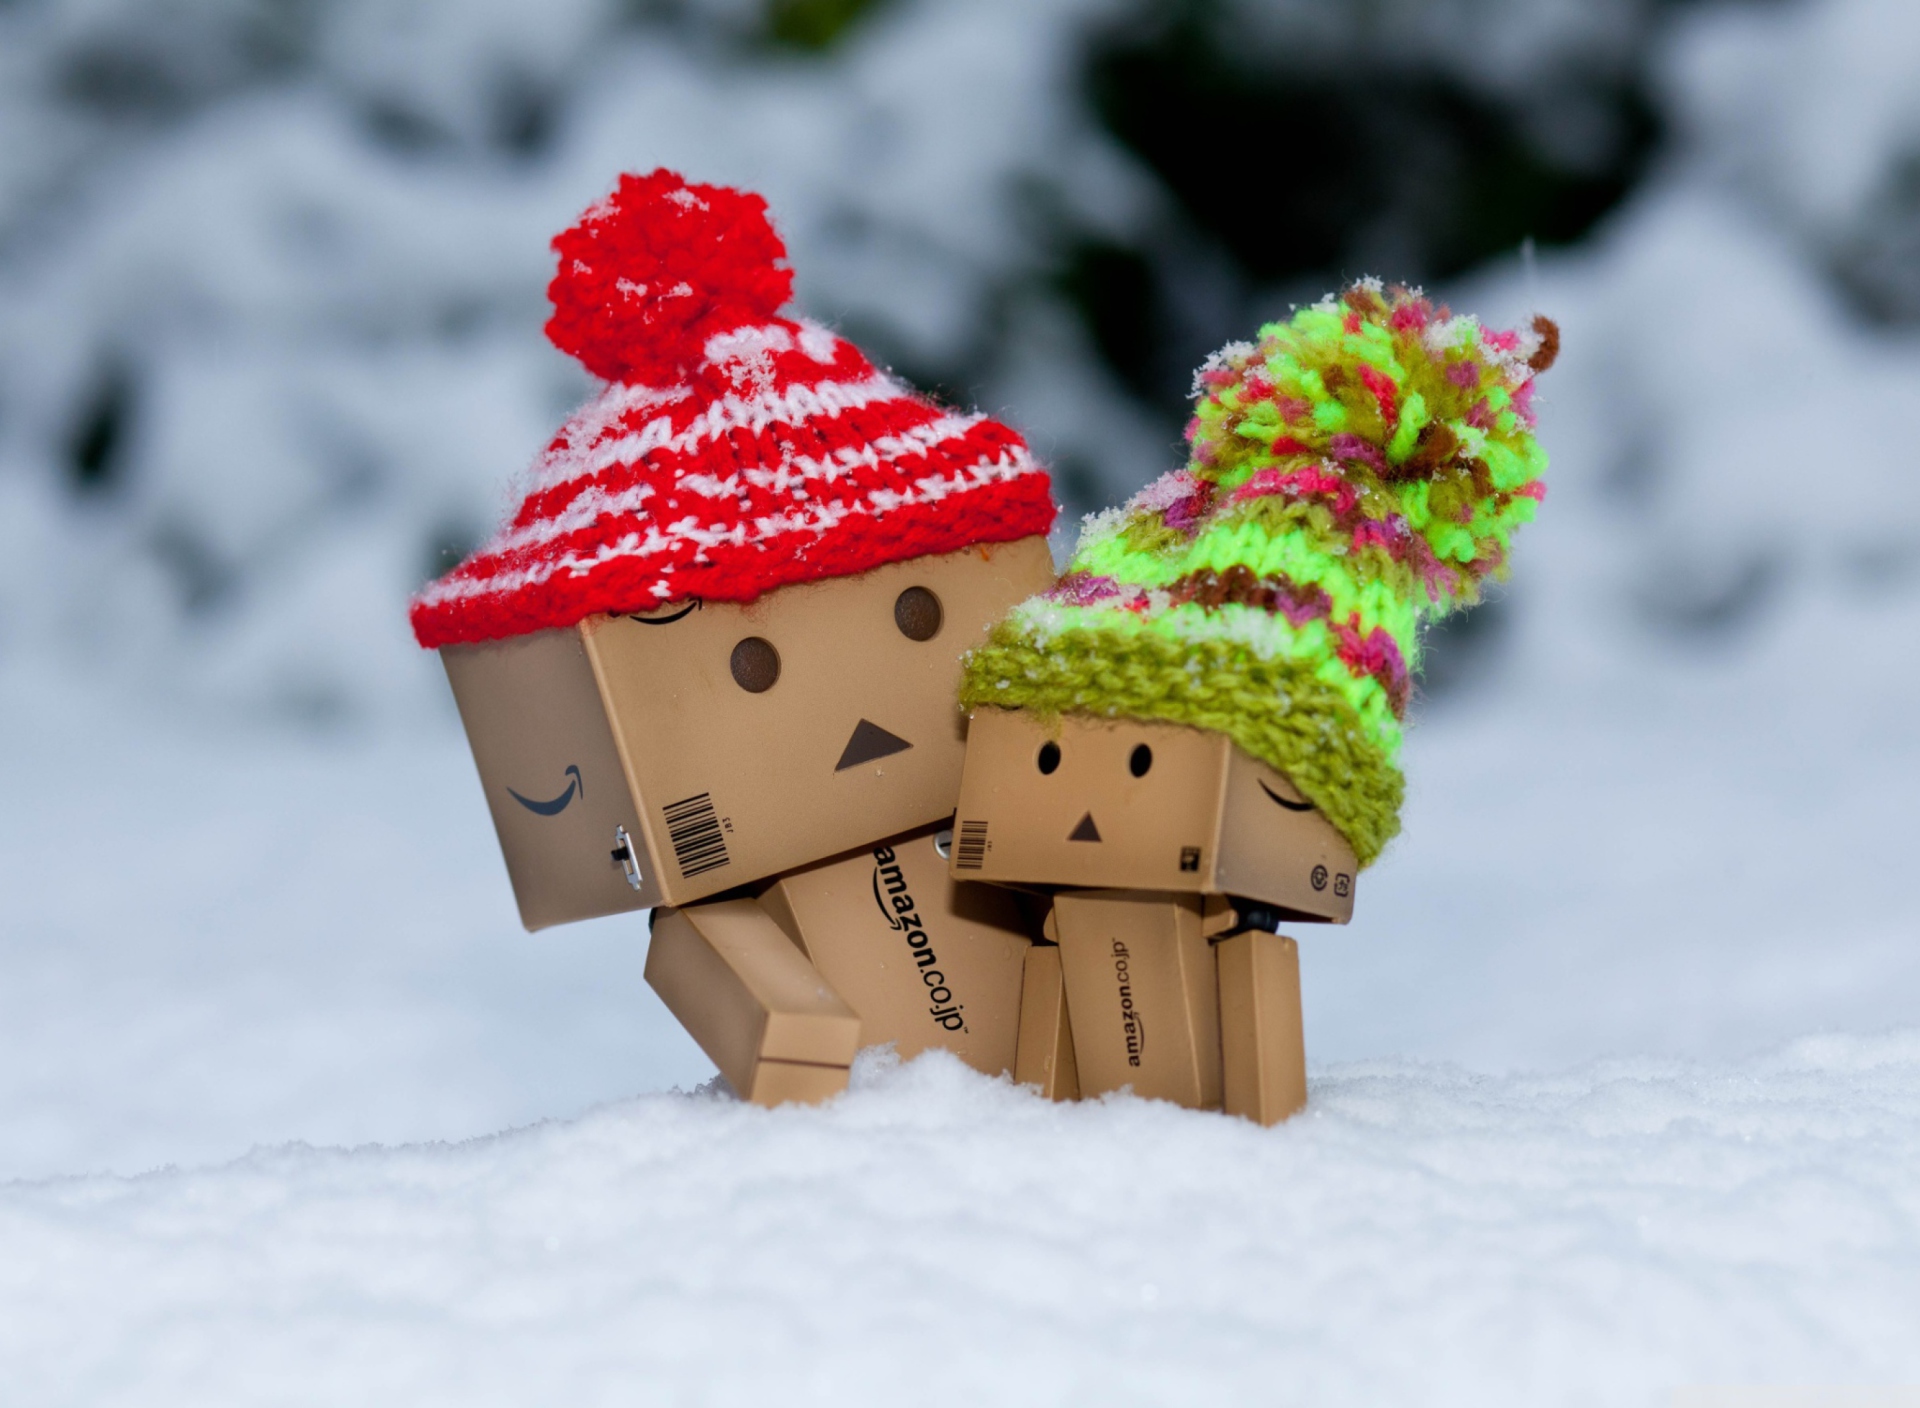 Das Danbo Is Scared By So Much Snow Wallpaper 1920x1408